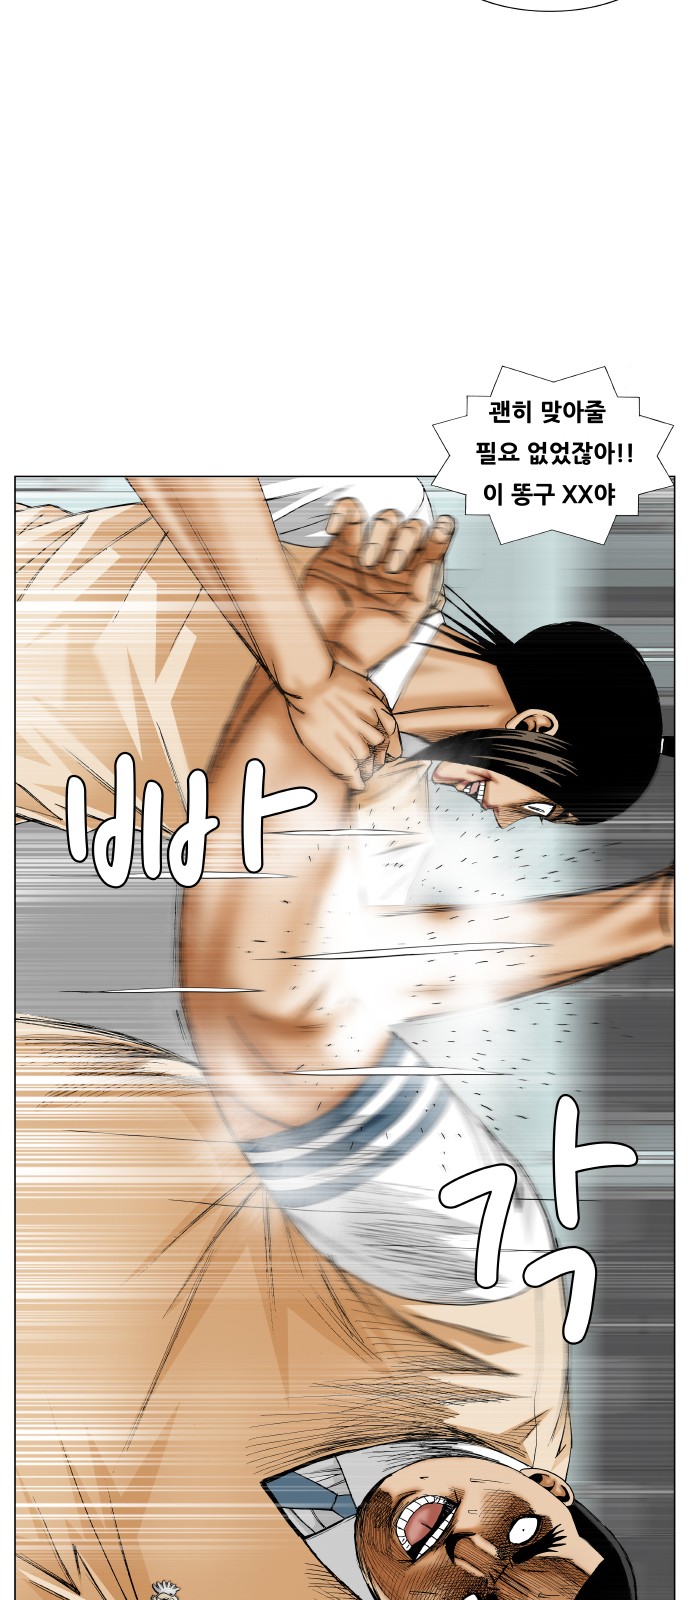 Ultimate Legend - Kang Hae Hyo - Chapter 179 - Page 2